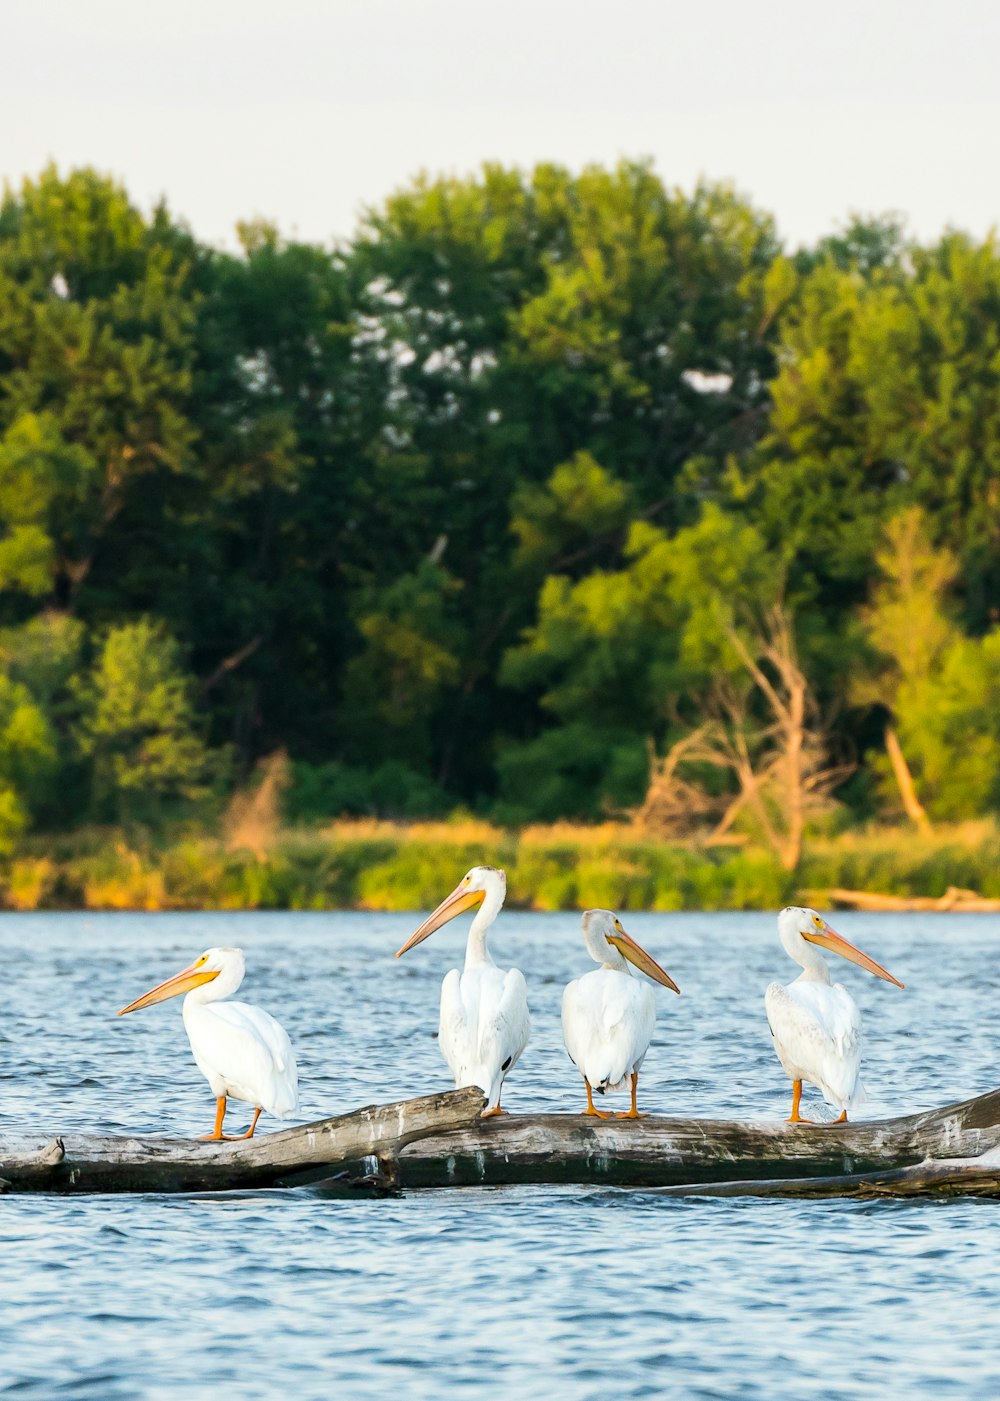 a group of pelicans sitting on a log in the water